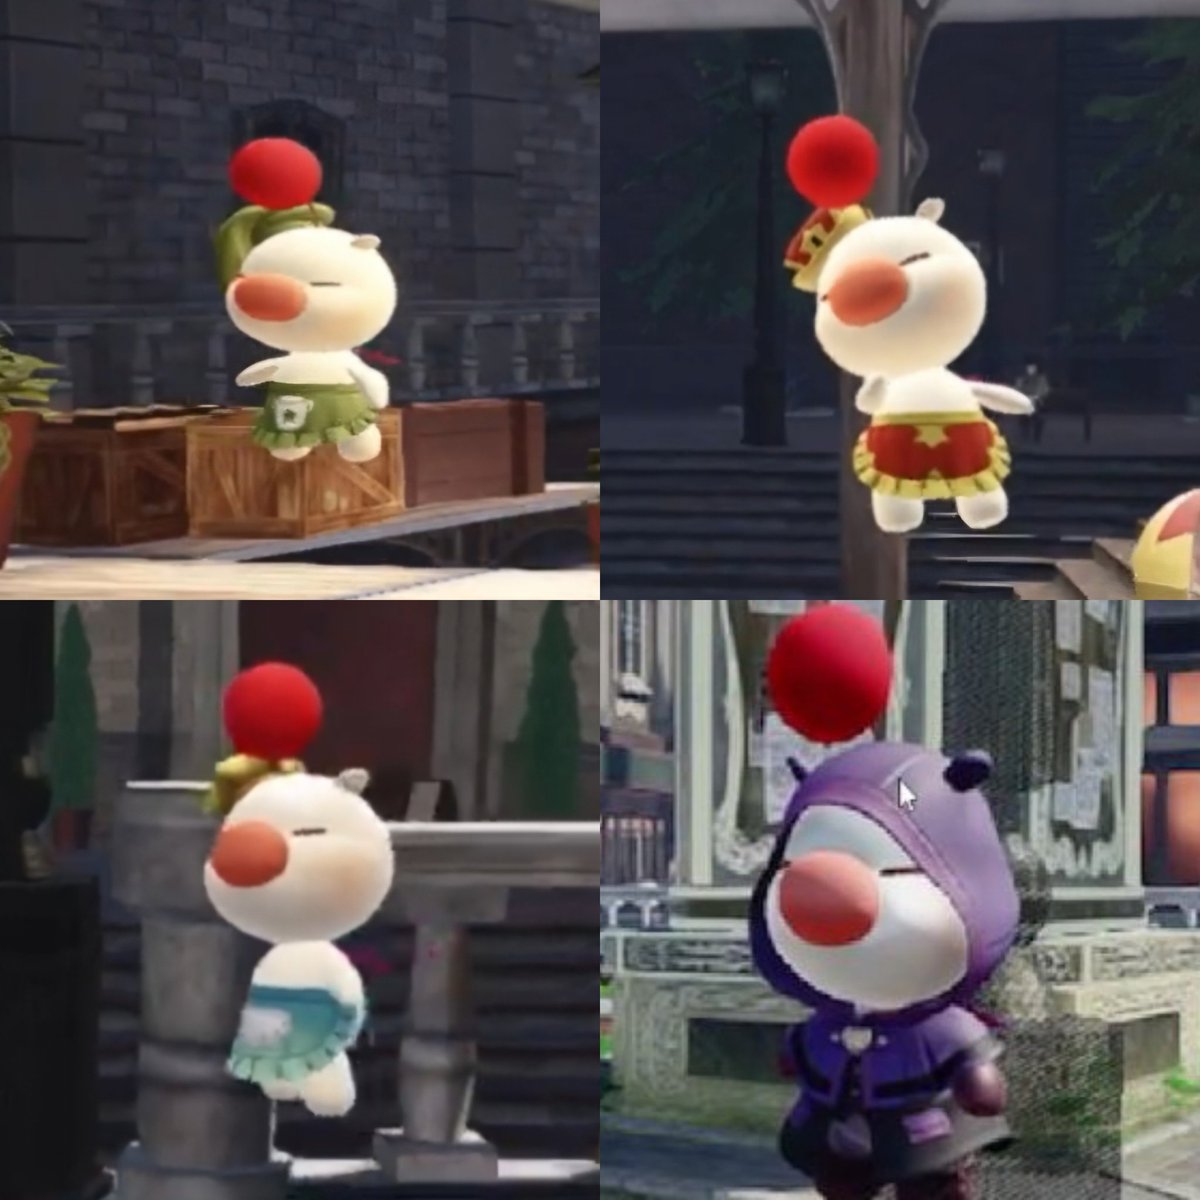 We have 4 Moogles for Missing-Link. The Shop Moogle, Locksmith Moogle, Weather Moogle, and the Beginners Guide Moogle. #KingdomHearts #KHML